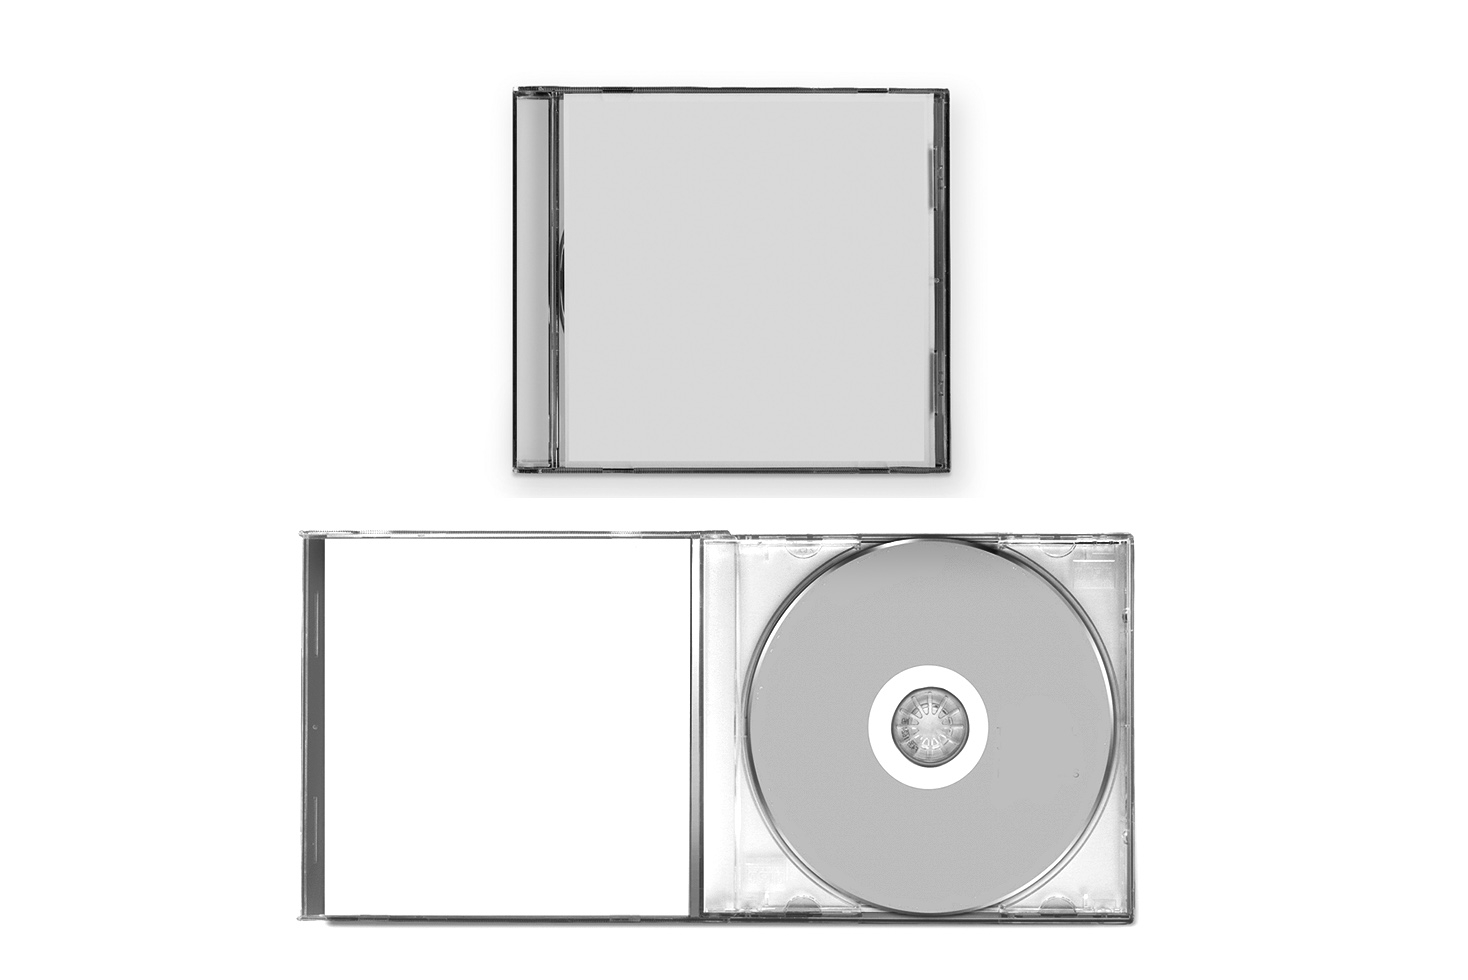 Print A Simple Jewel Case Cd Package At Home – Music Artwork